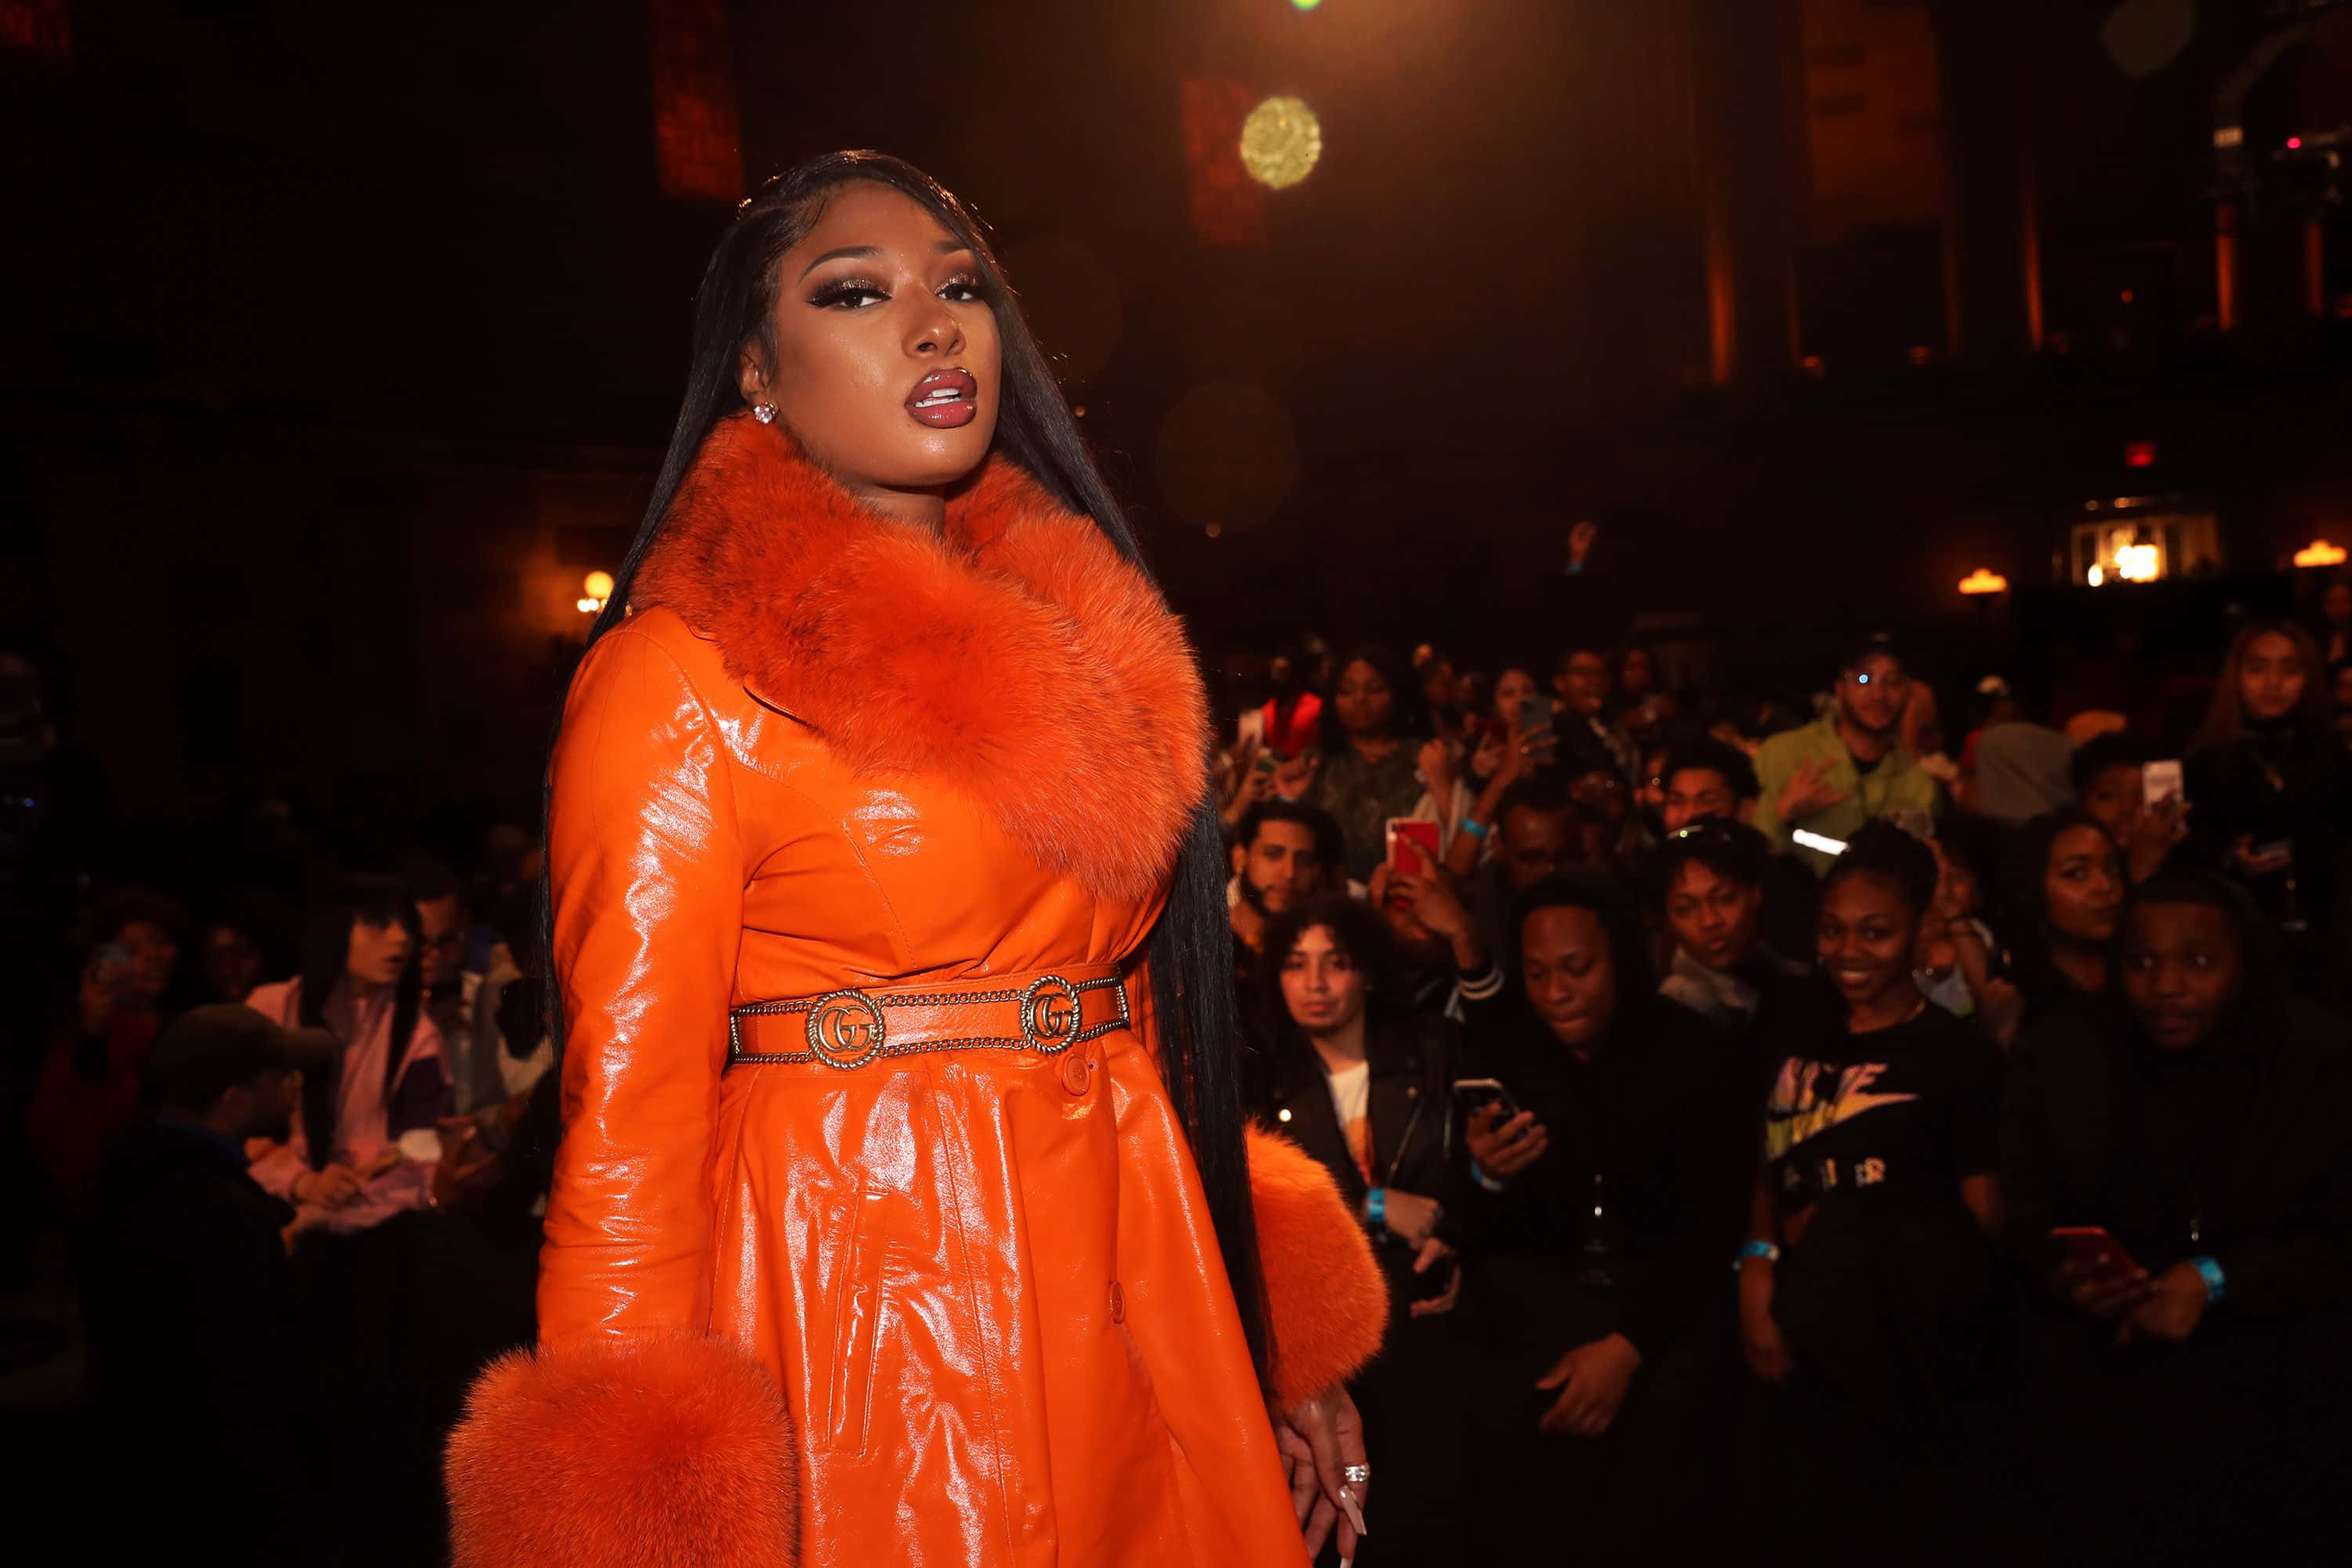 Megan Thee Stallion strikes a pose in a stylish outfit